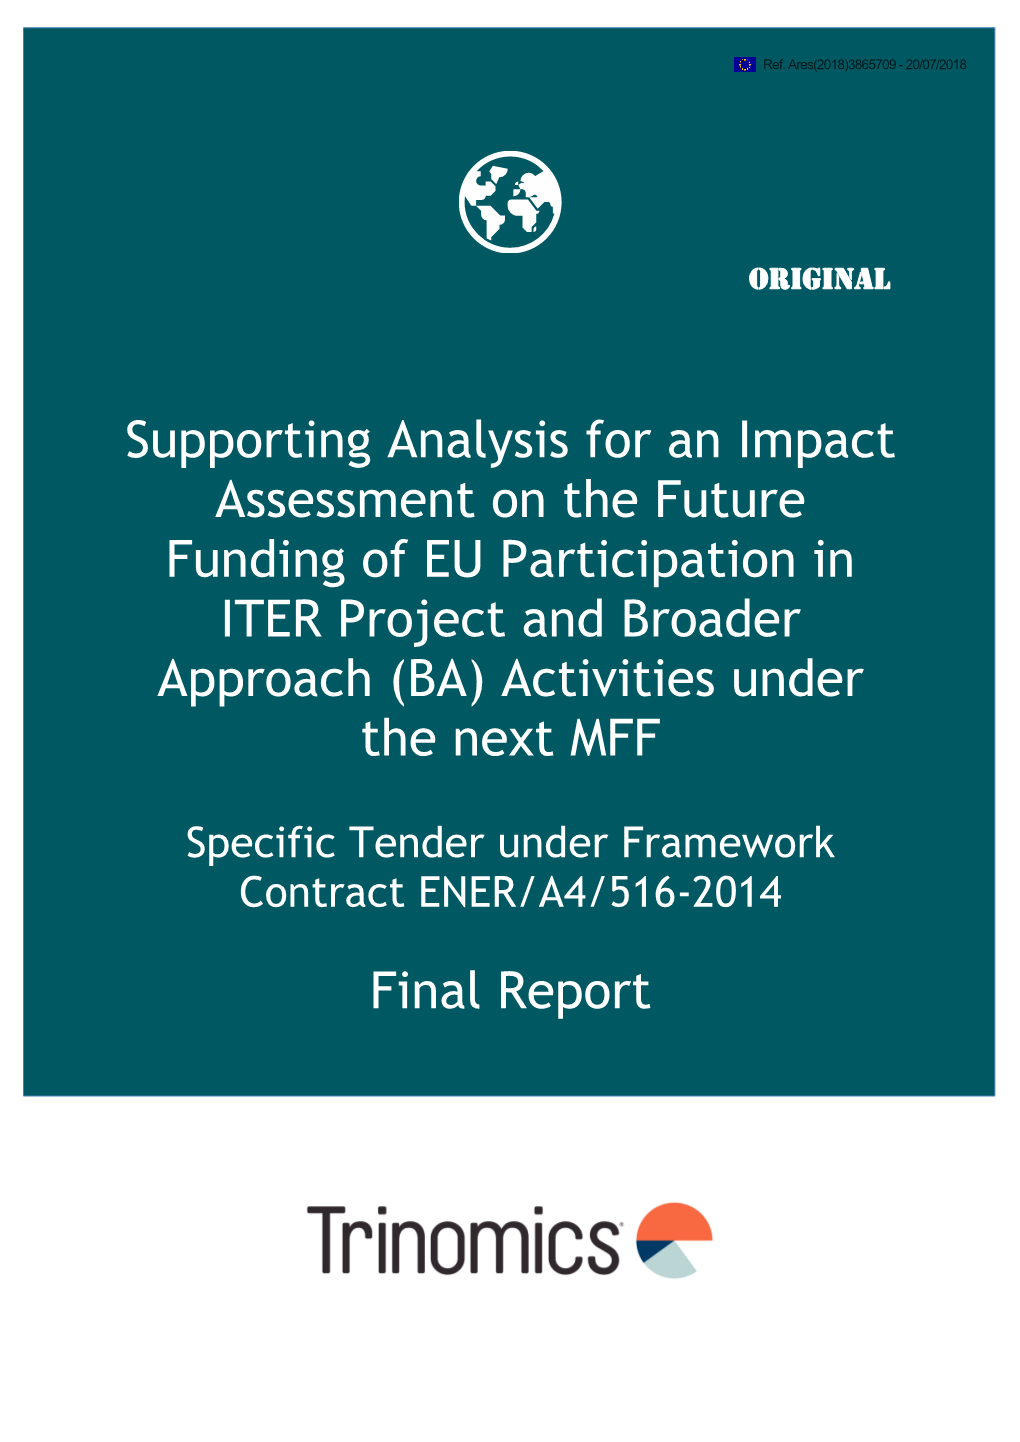 Supporting Analysis for an Impact Assessment on the Future Funding of EU Participation in ITER Project and Broader Approach (BA) Activities Under the Next MFF